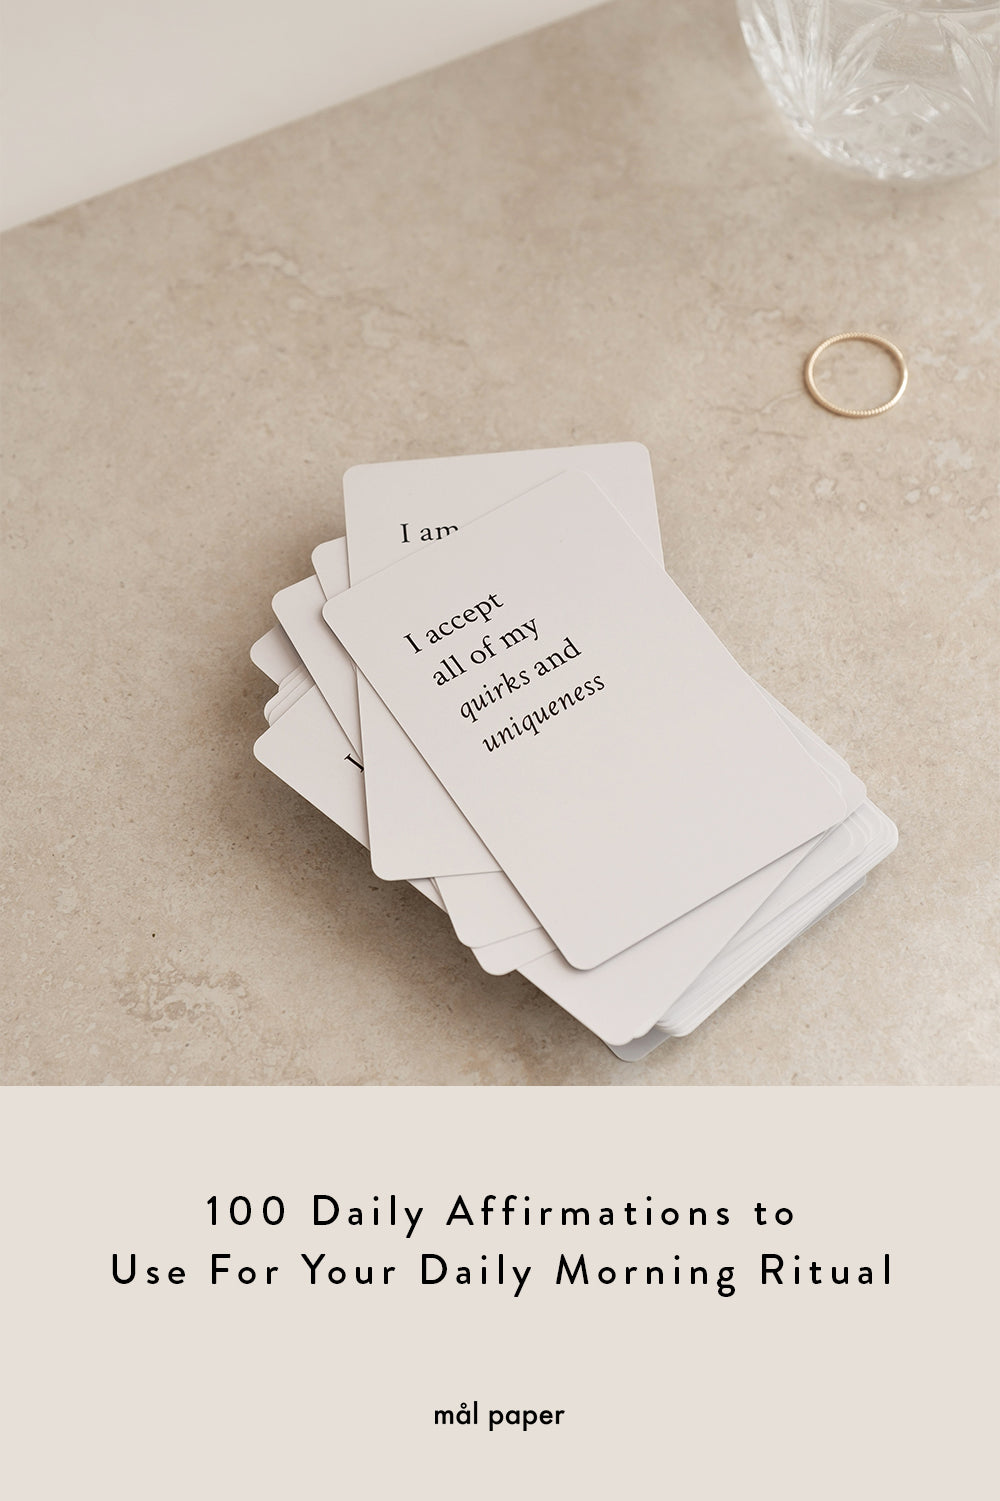 100 Daily Affirmations to Use For Your Daily Morning Ritual